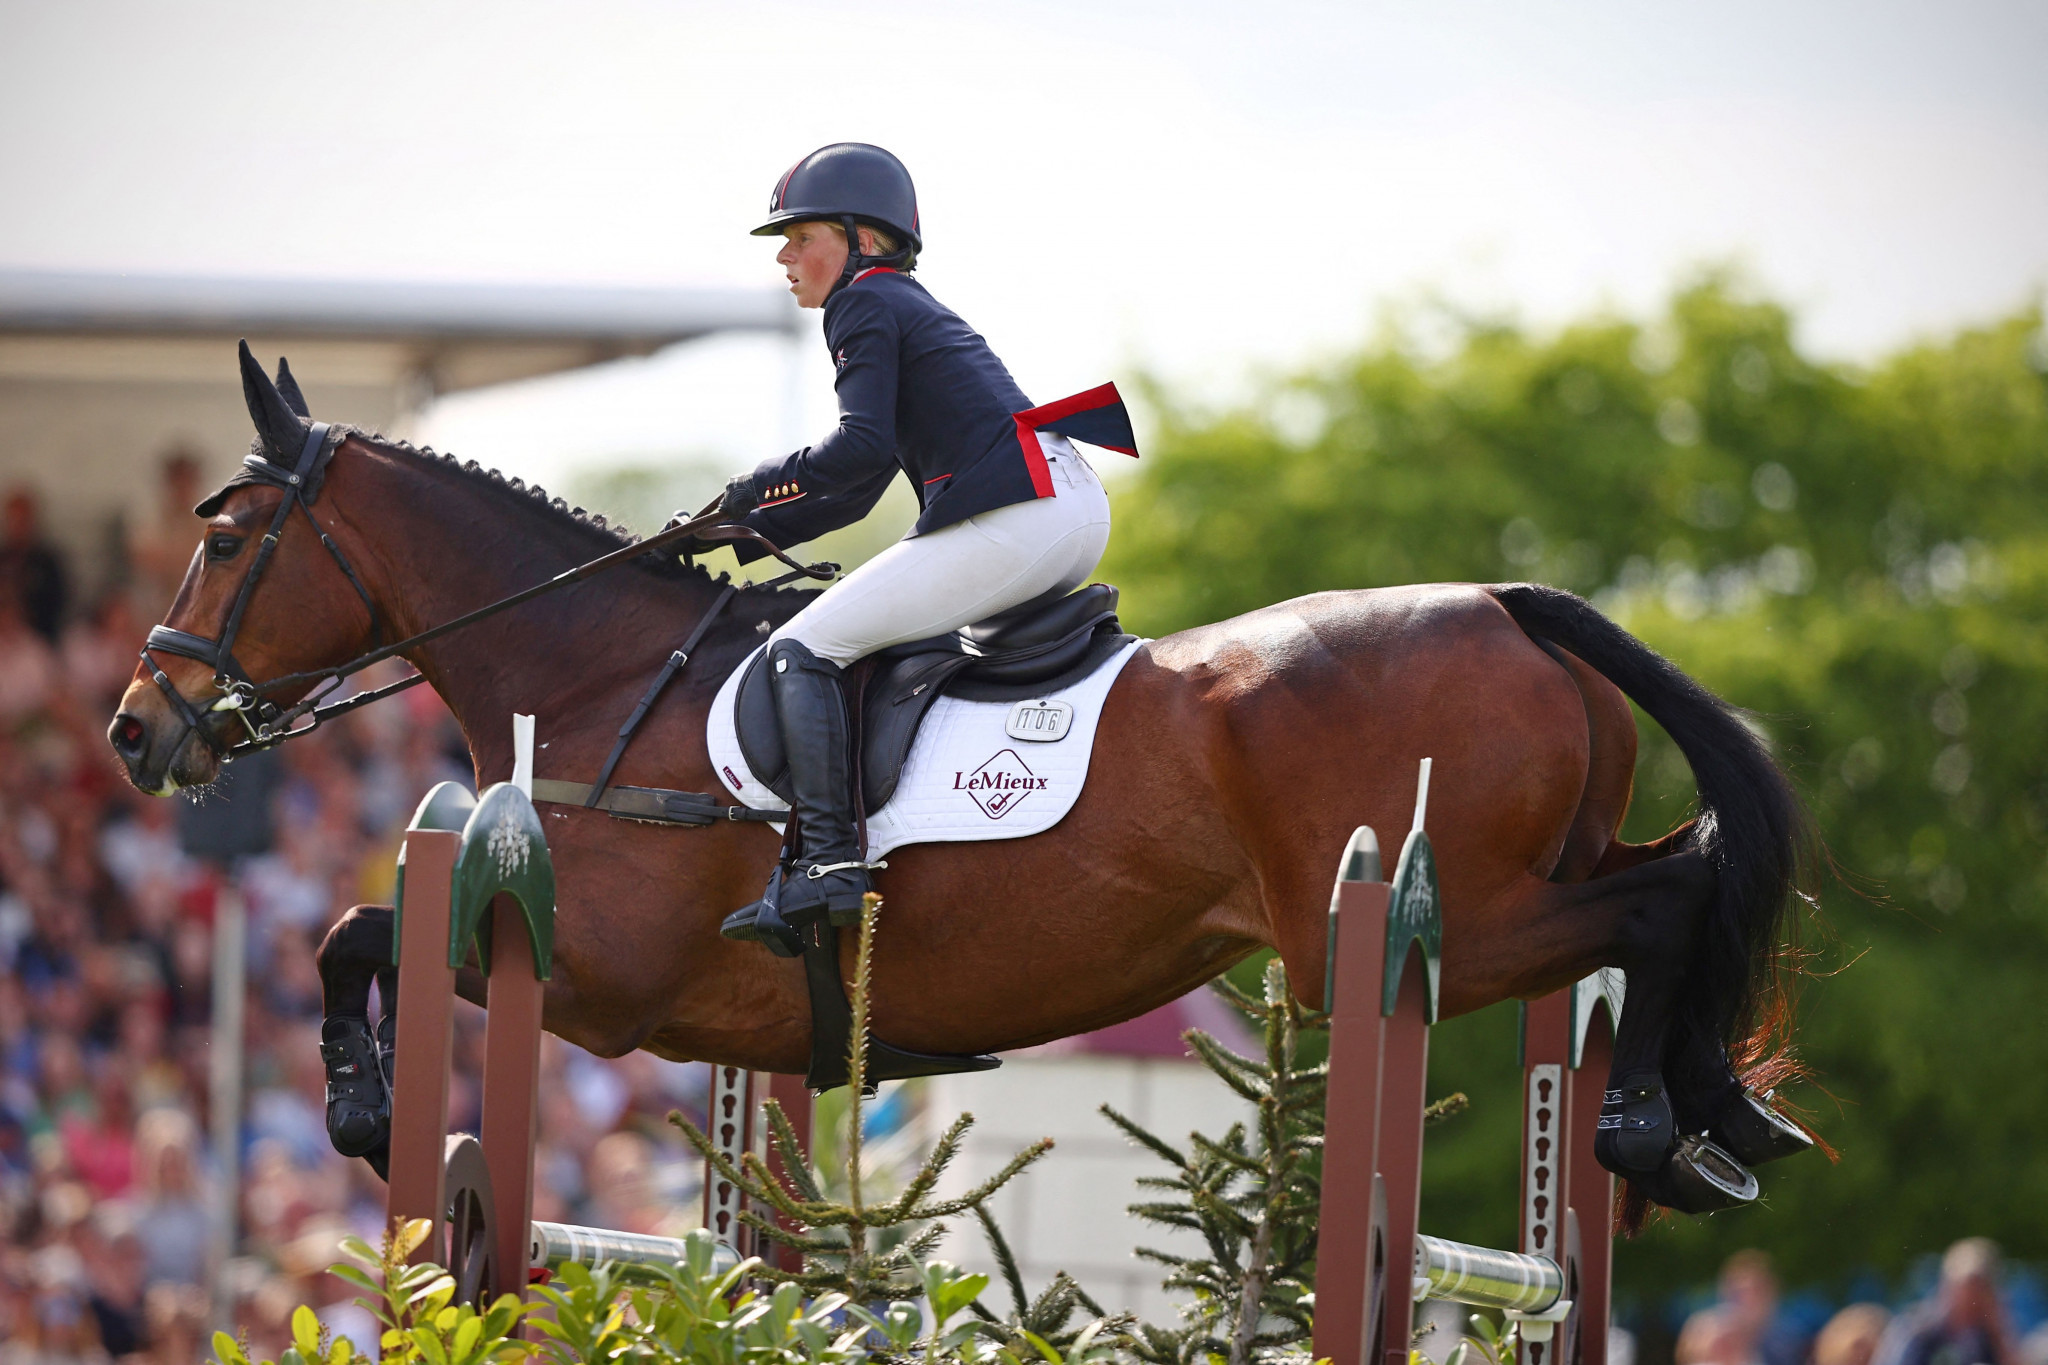 Tokyo 2020 eventing champions set out on road to Paris 2024 at FEI World Championships